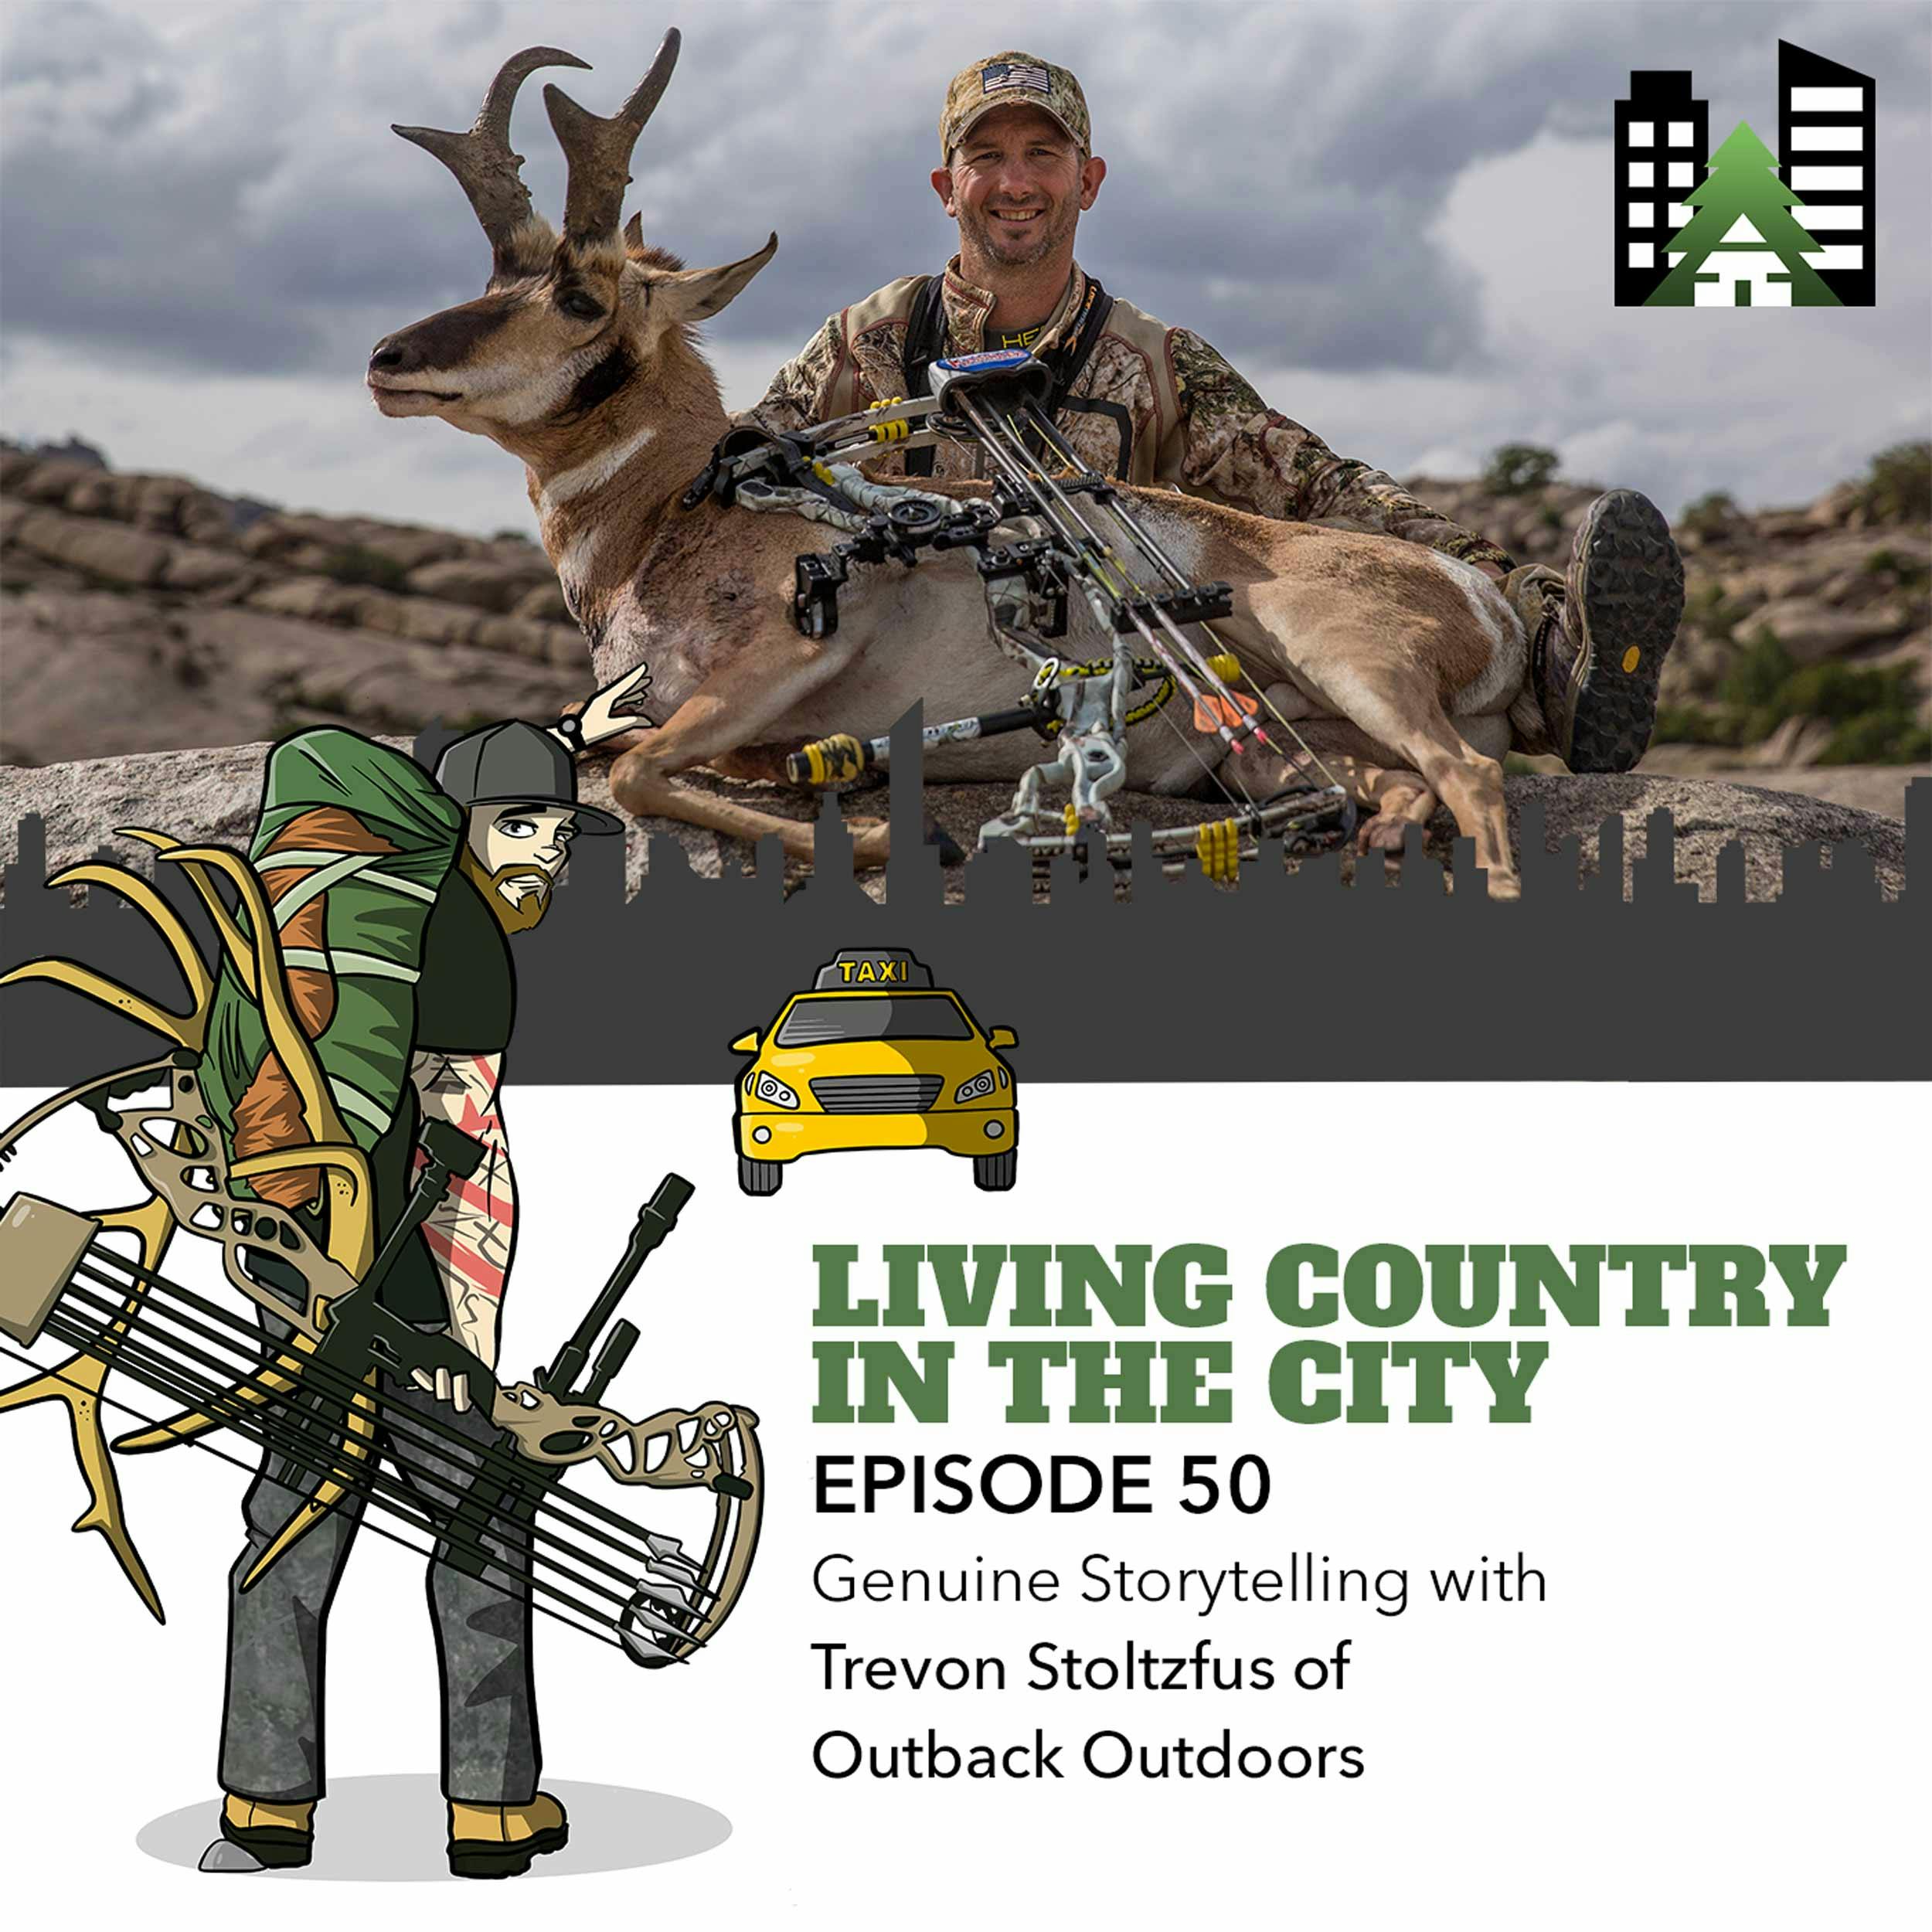 Ep 50 - Genuine Storytelling with Trevon Stoltzfus of Outback Outdoors